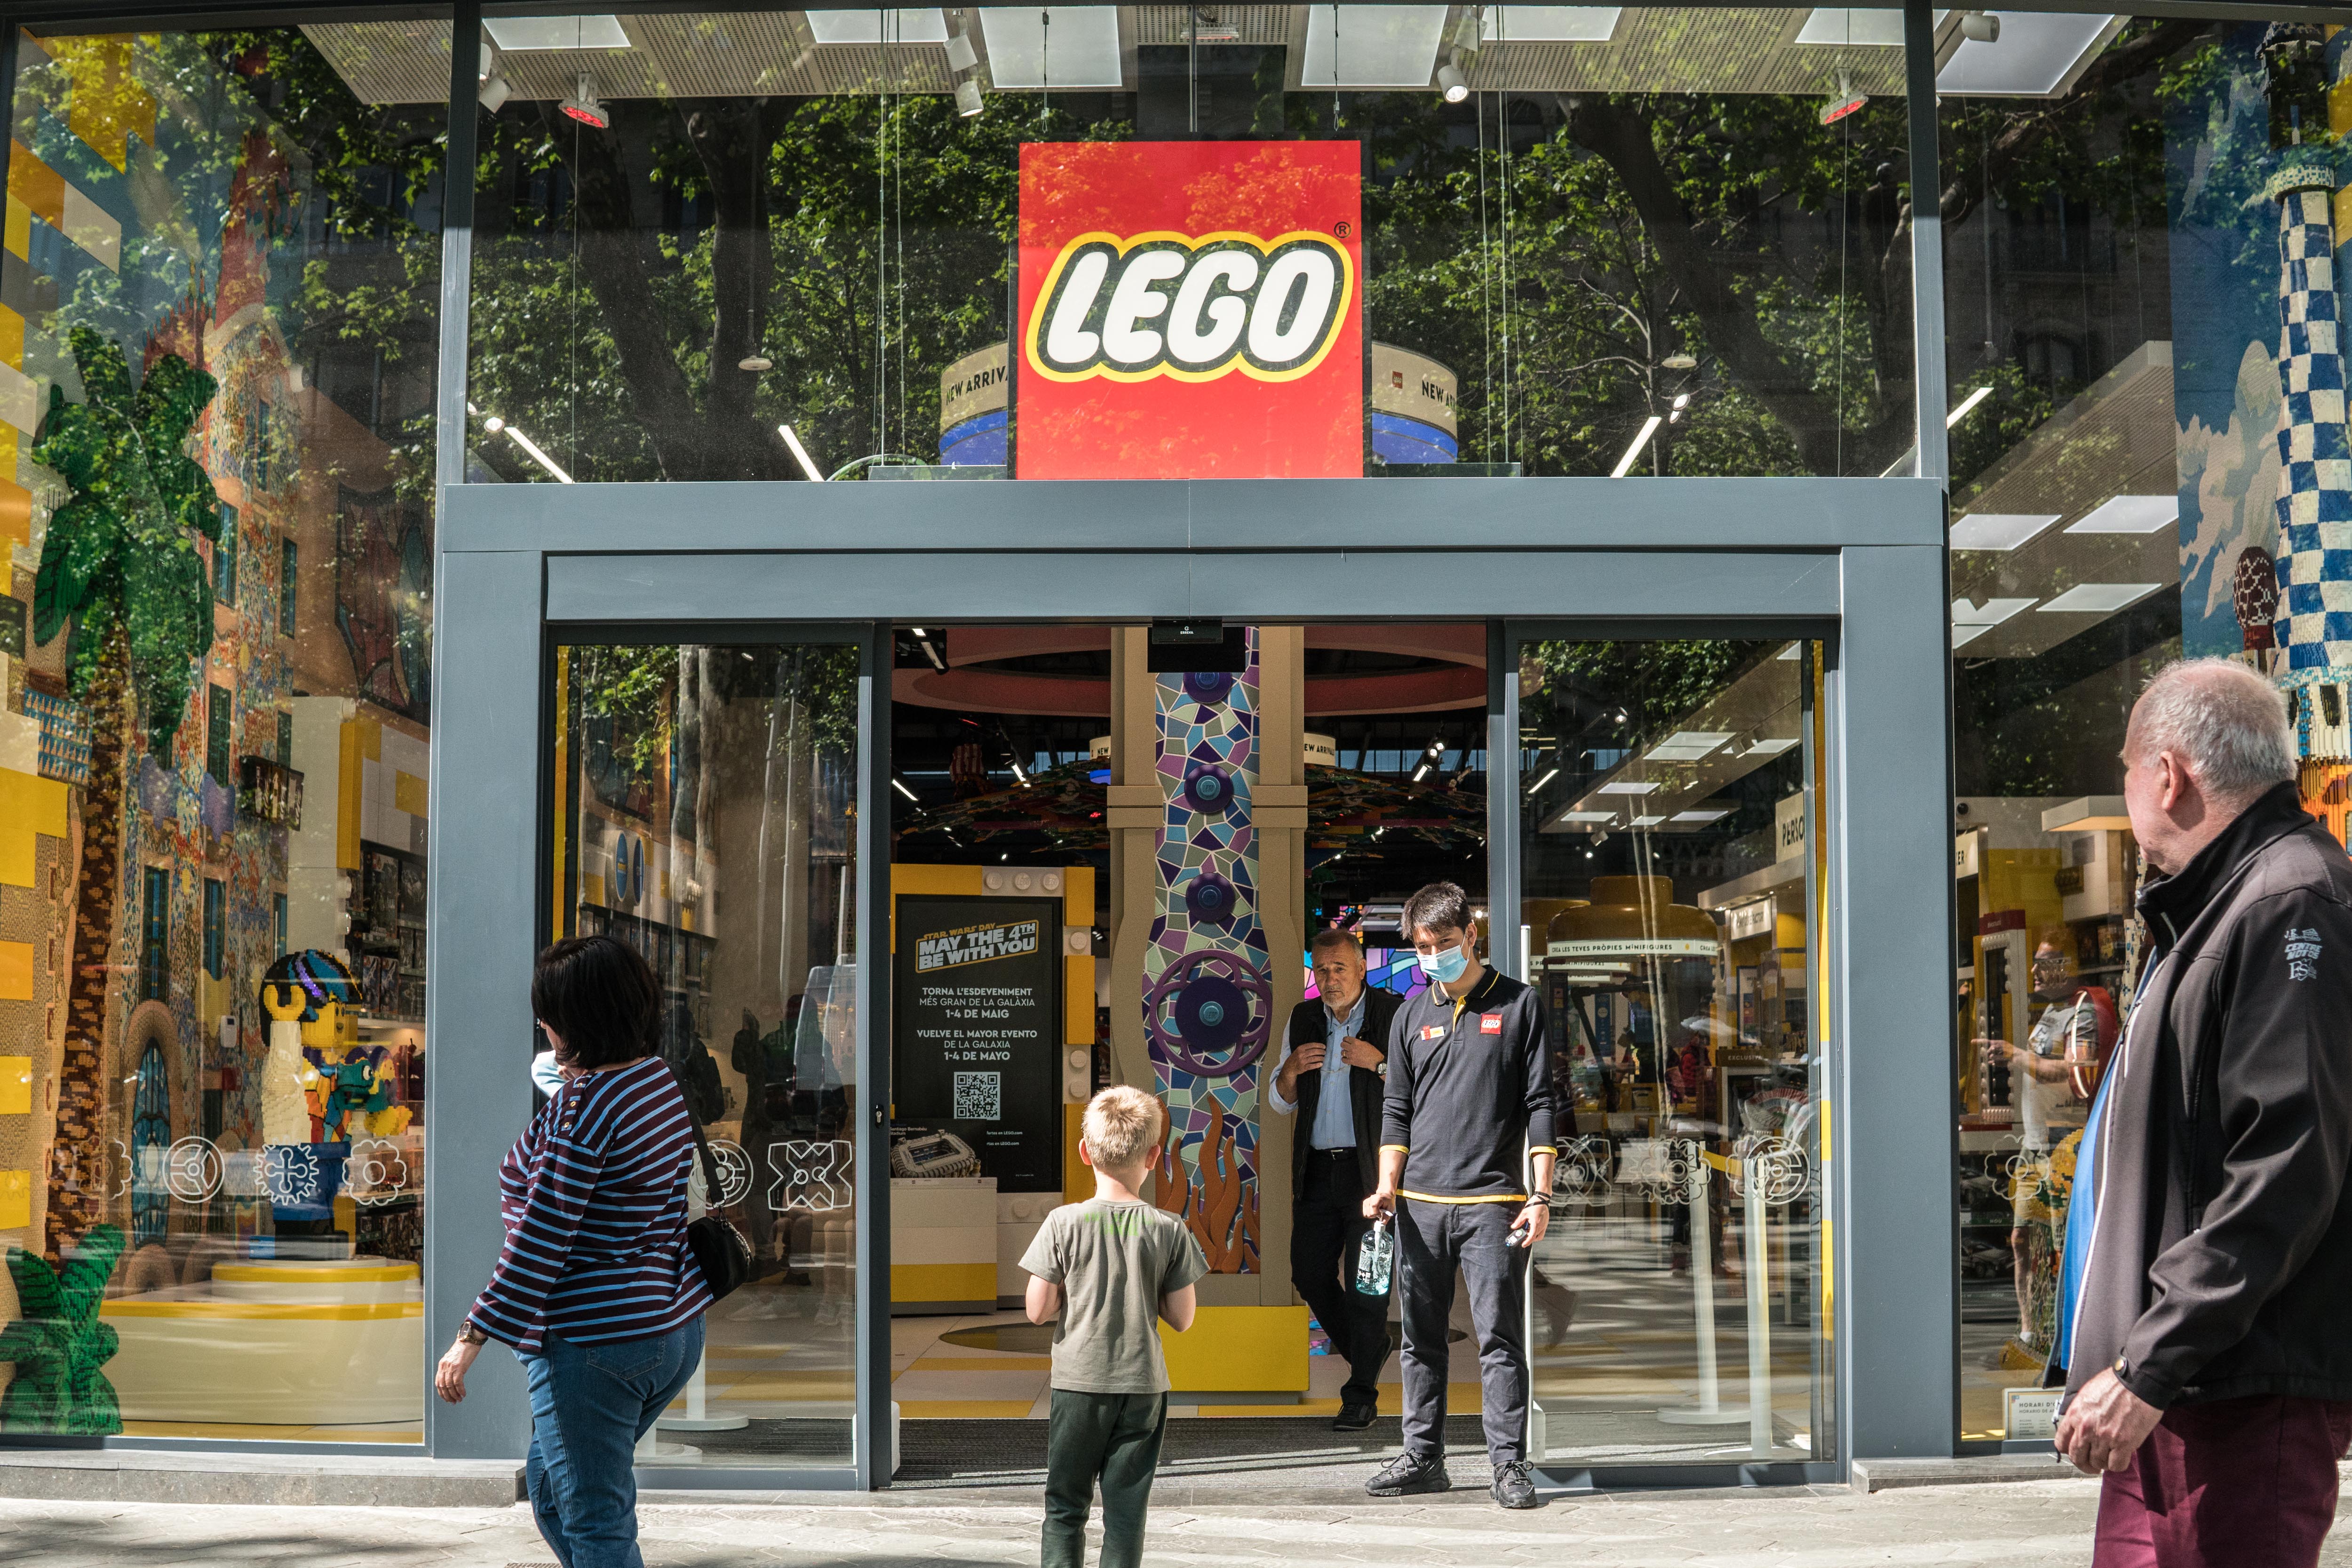 The Lego store in Barcelona.